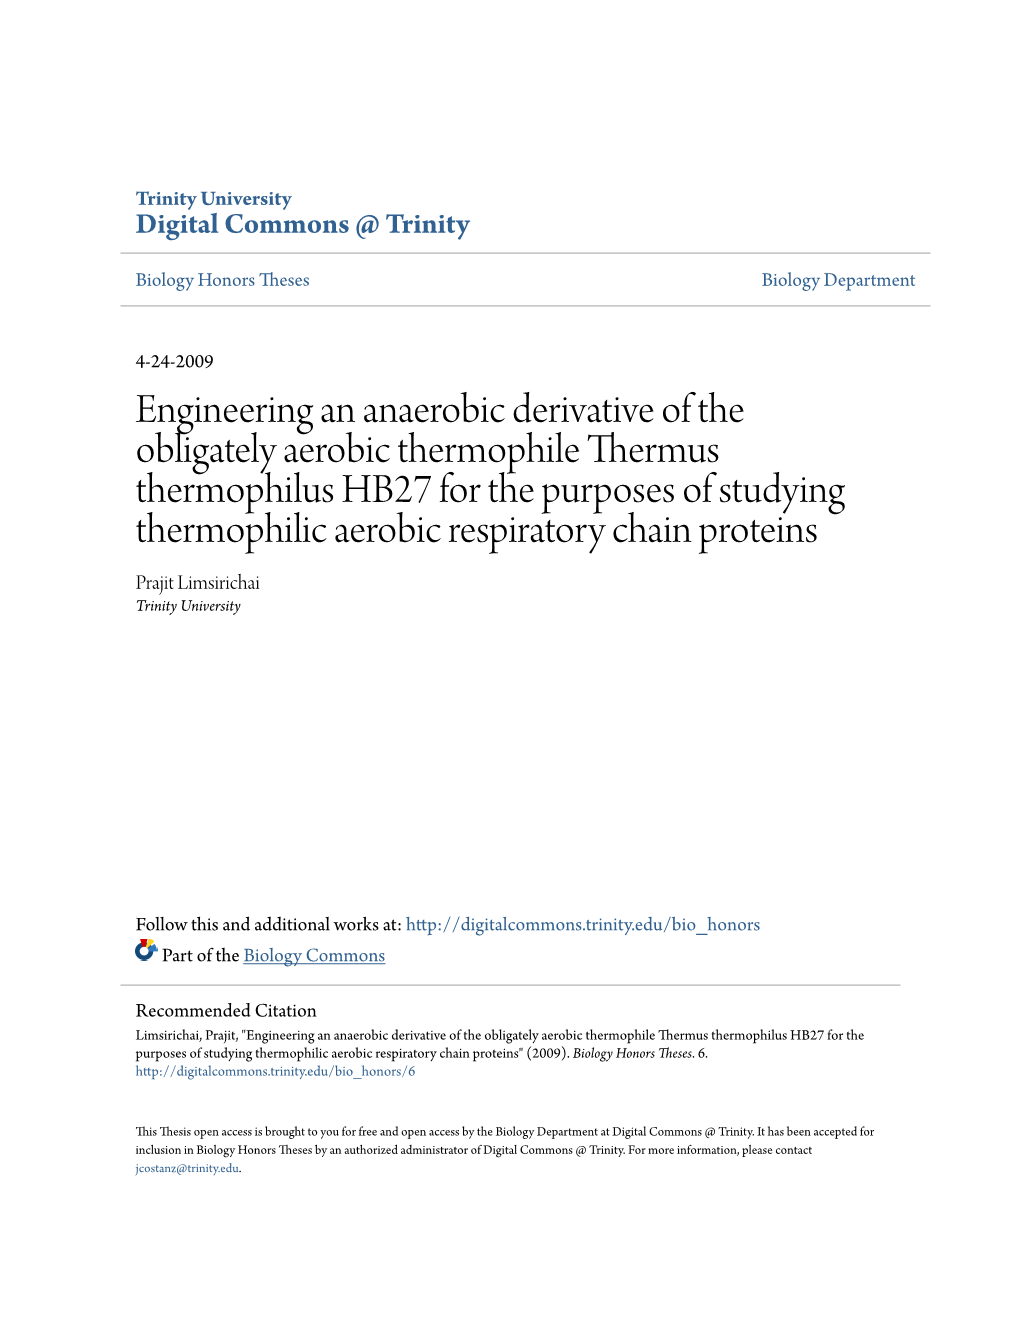 Engineering an Anaerobic Derivative of the Obligately Aerobic Thermophile Thermus Thermophilus HB27 for the Purposes of Studying